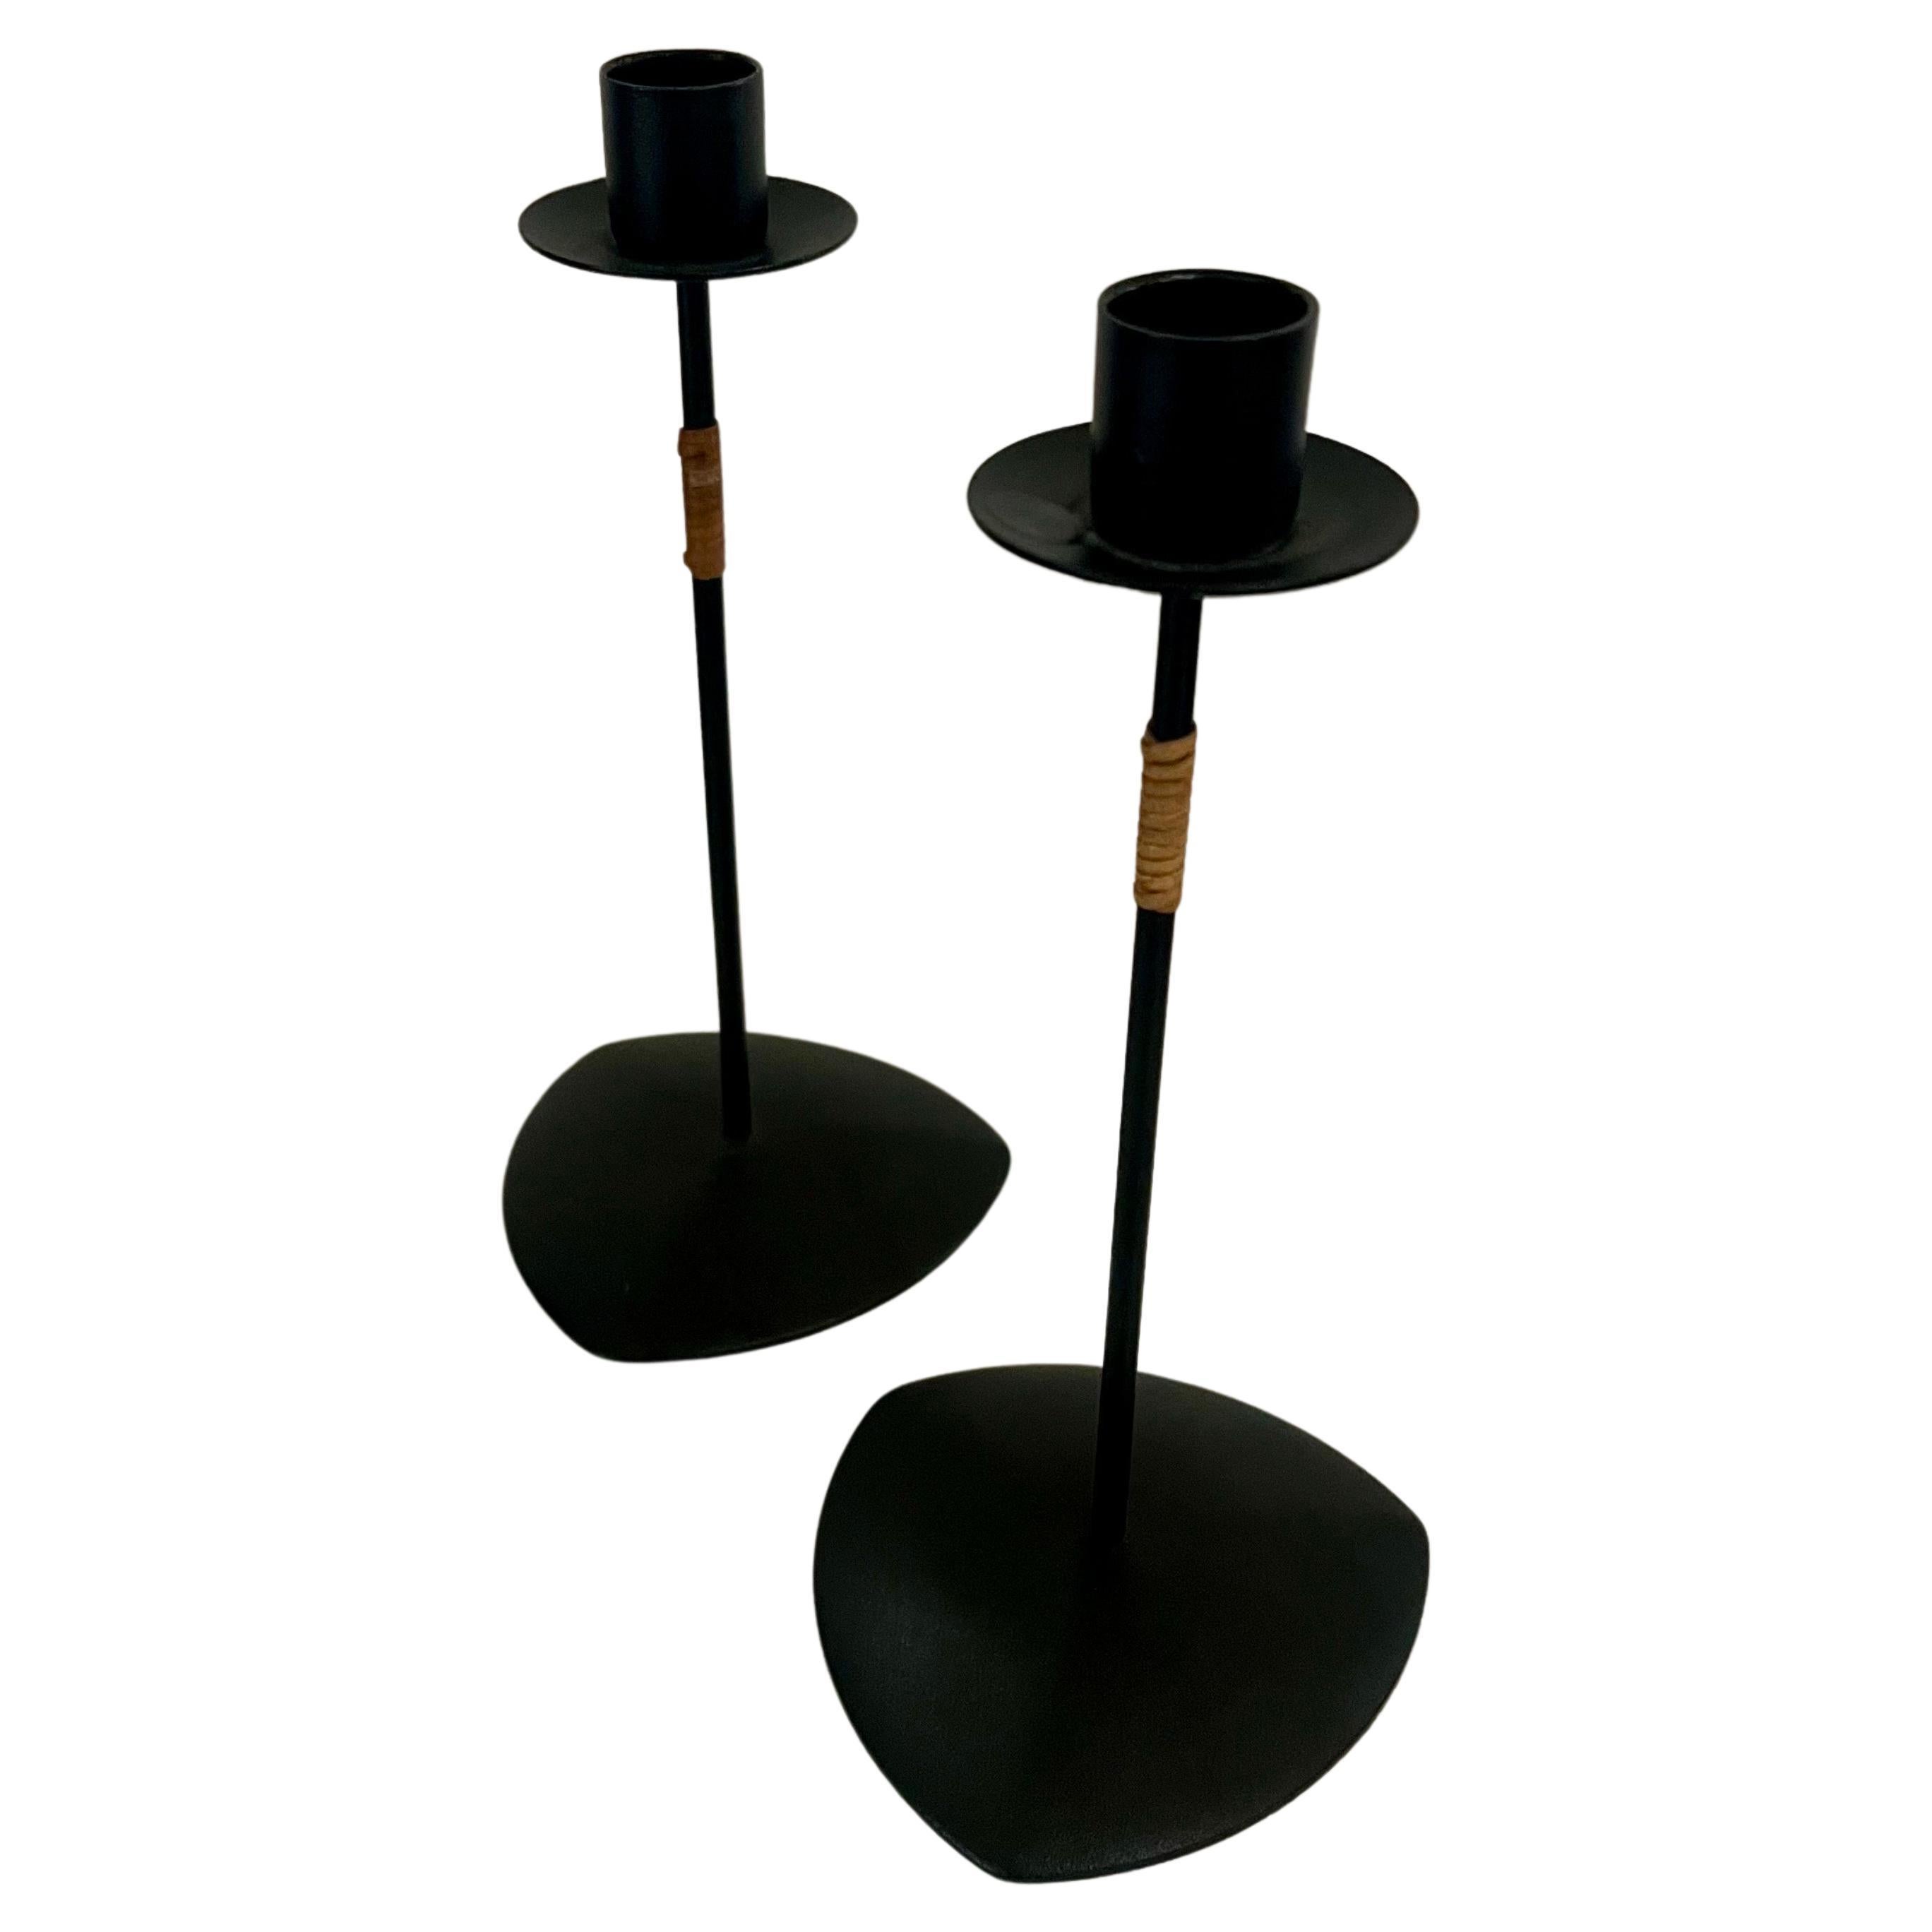 Danish modern Pair of Laurids Lonborg Candle Holders Metal & Cane In Excellent Condition For Sale In San Diego, CA